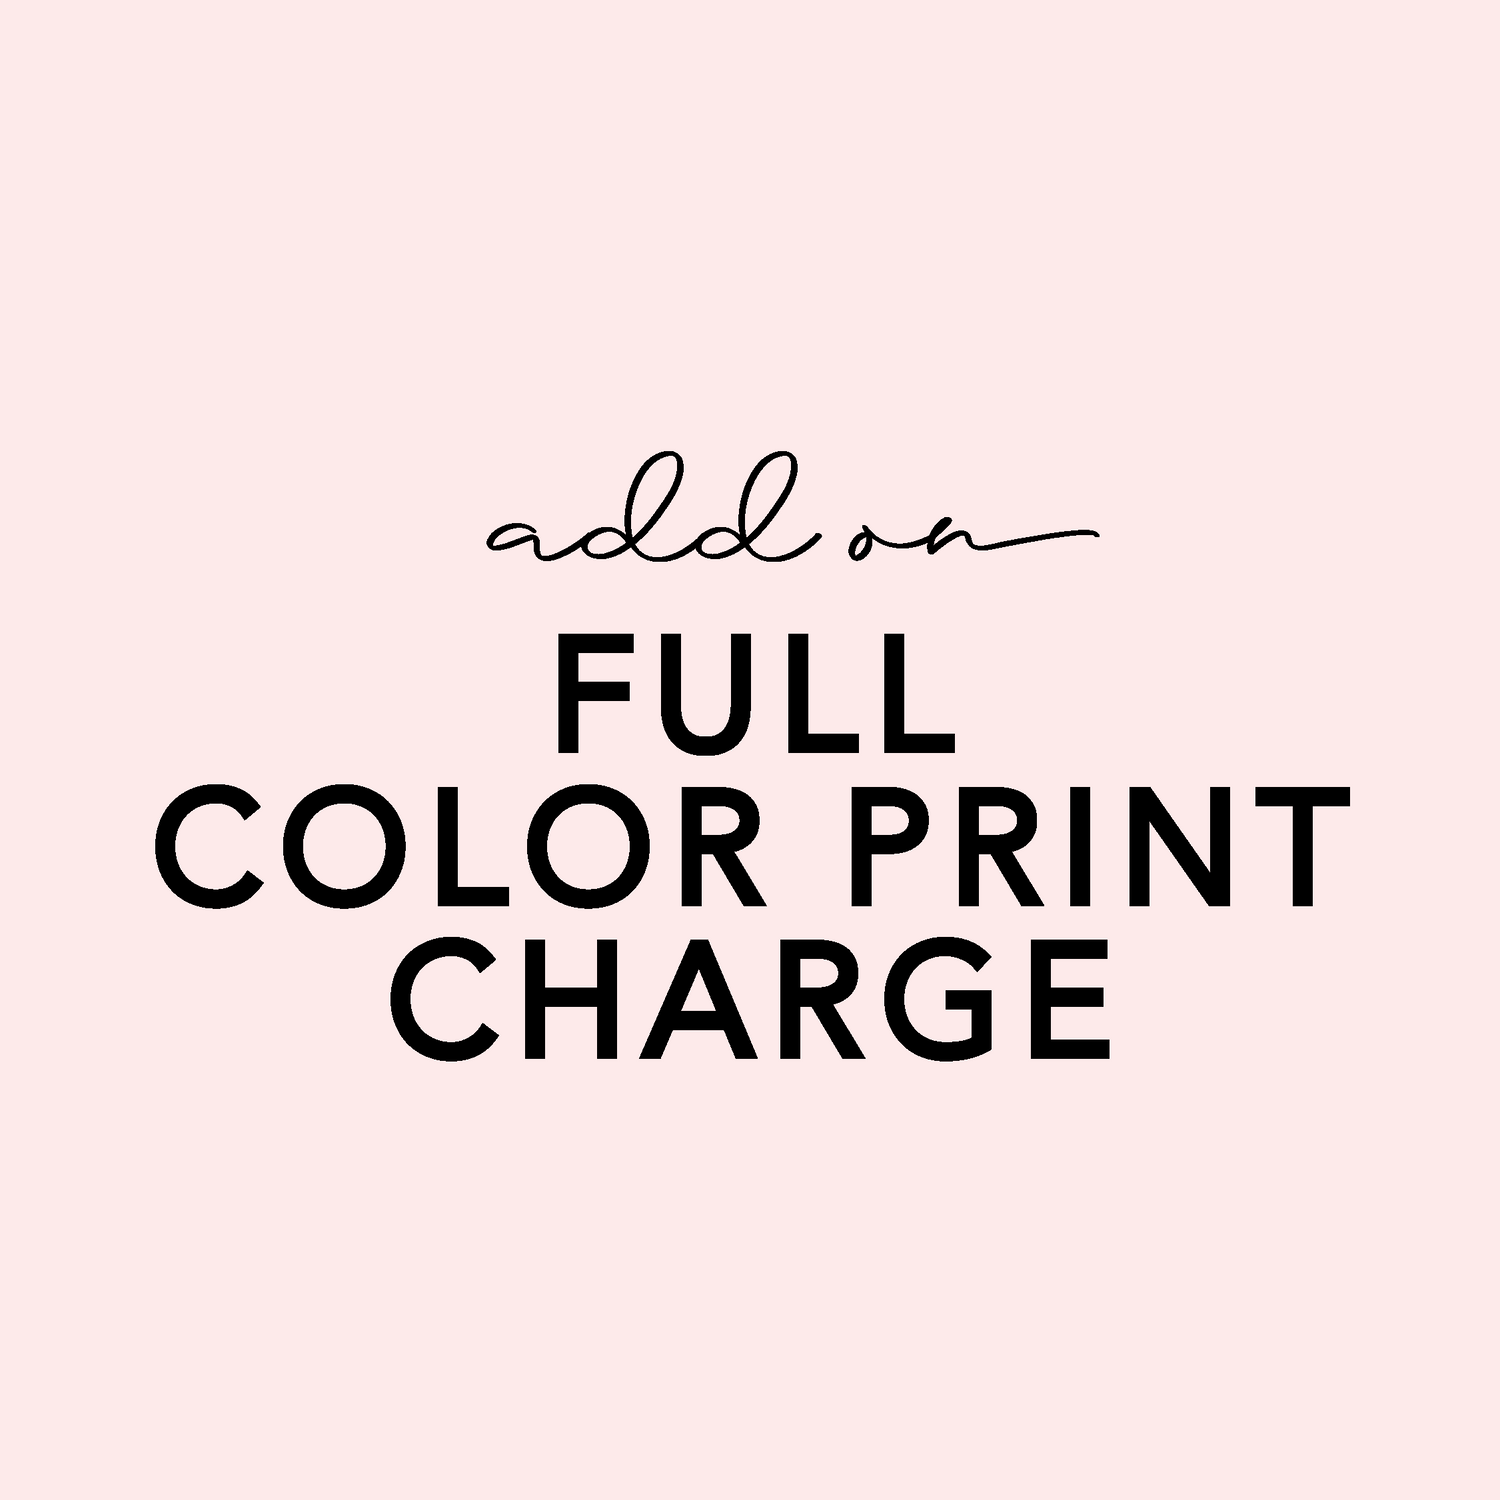 ADD ON - Full Color Print